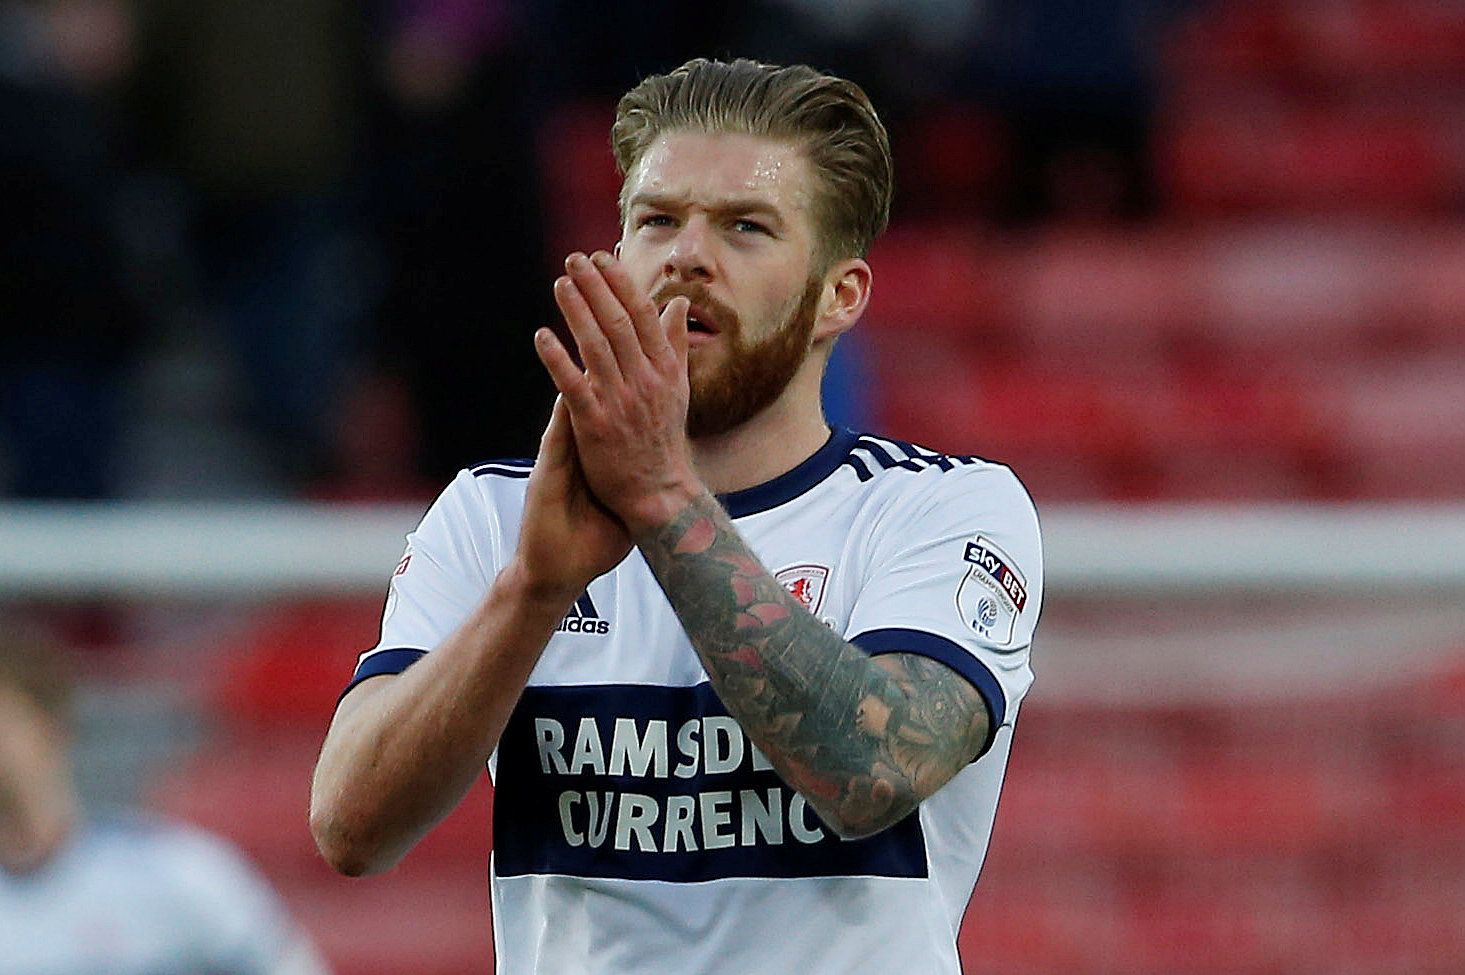 Soccer Football - Championship - Sunderland vs Middlesbrough - Stadium of Light, Sunderland, Britain - February 24, 2018   Middlesbrough's Adam Clayton applauds the fans after the match        Action Images/Craig Brough    EDITORIAL USE ONLY. No use with unauthorized audio, video, data, fixture lists, club/league logos or 